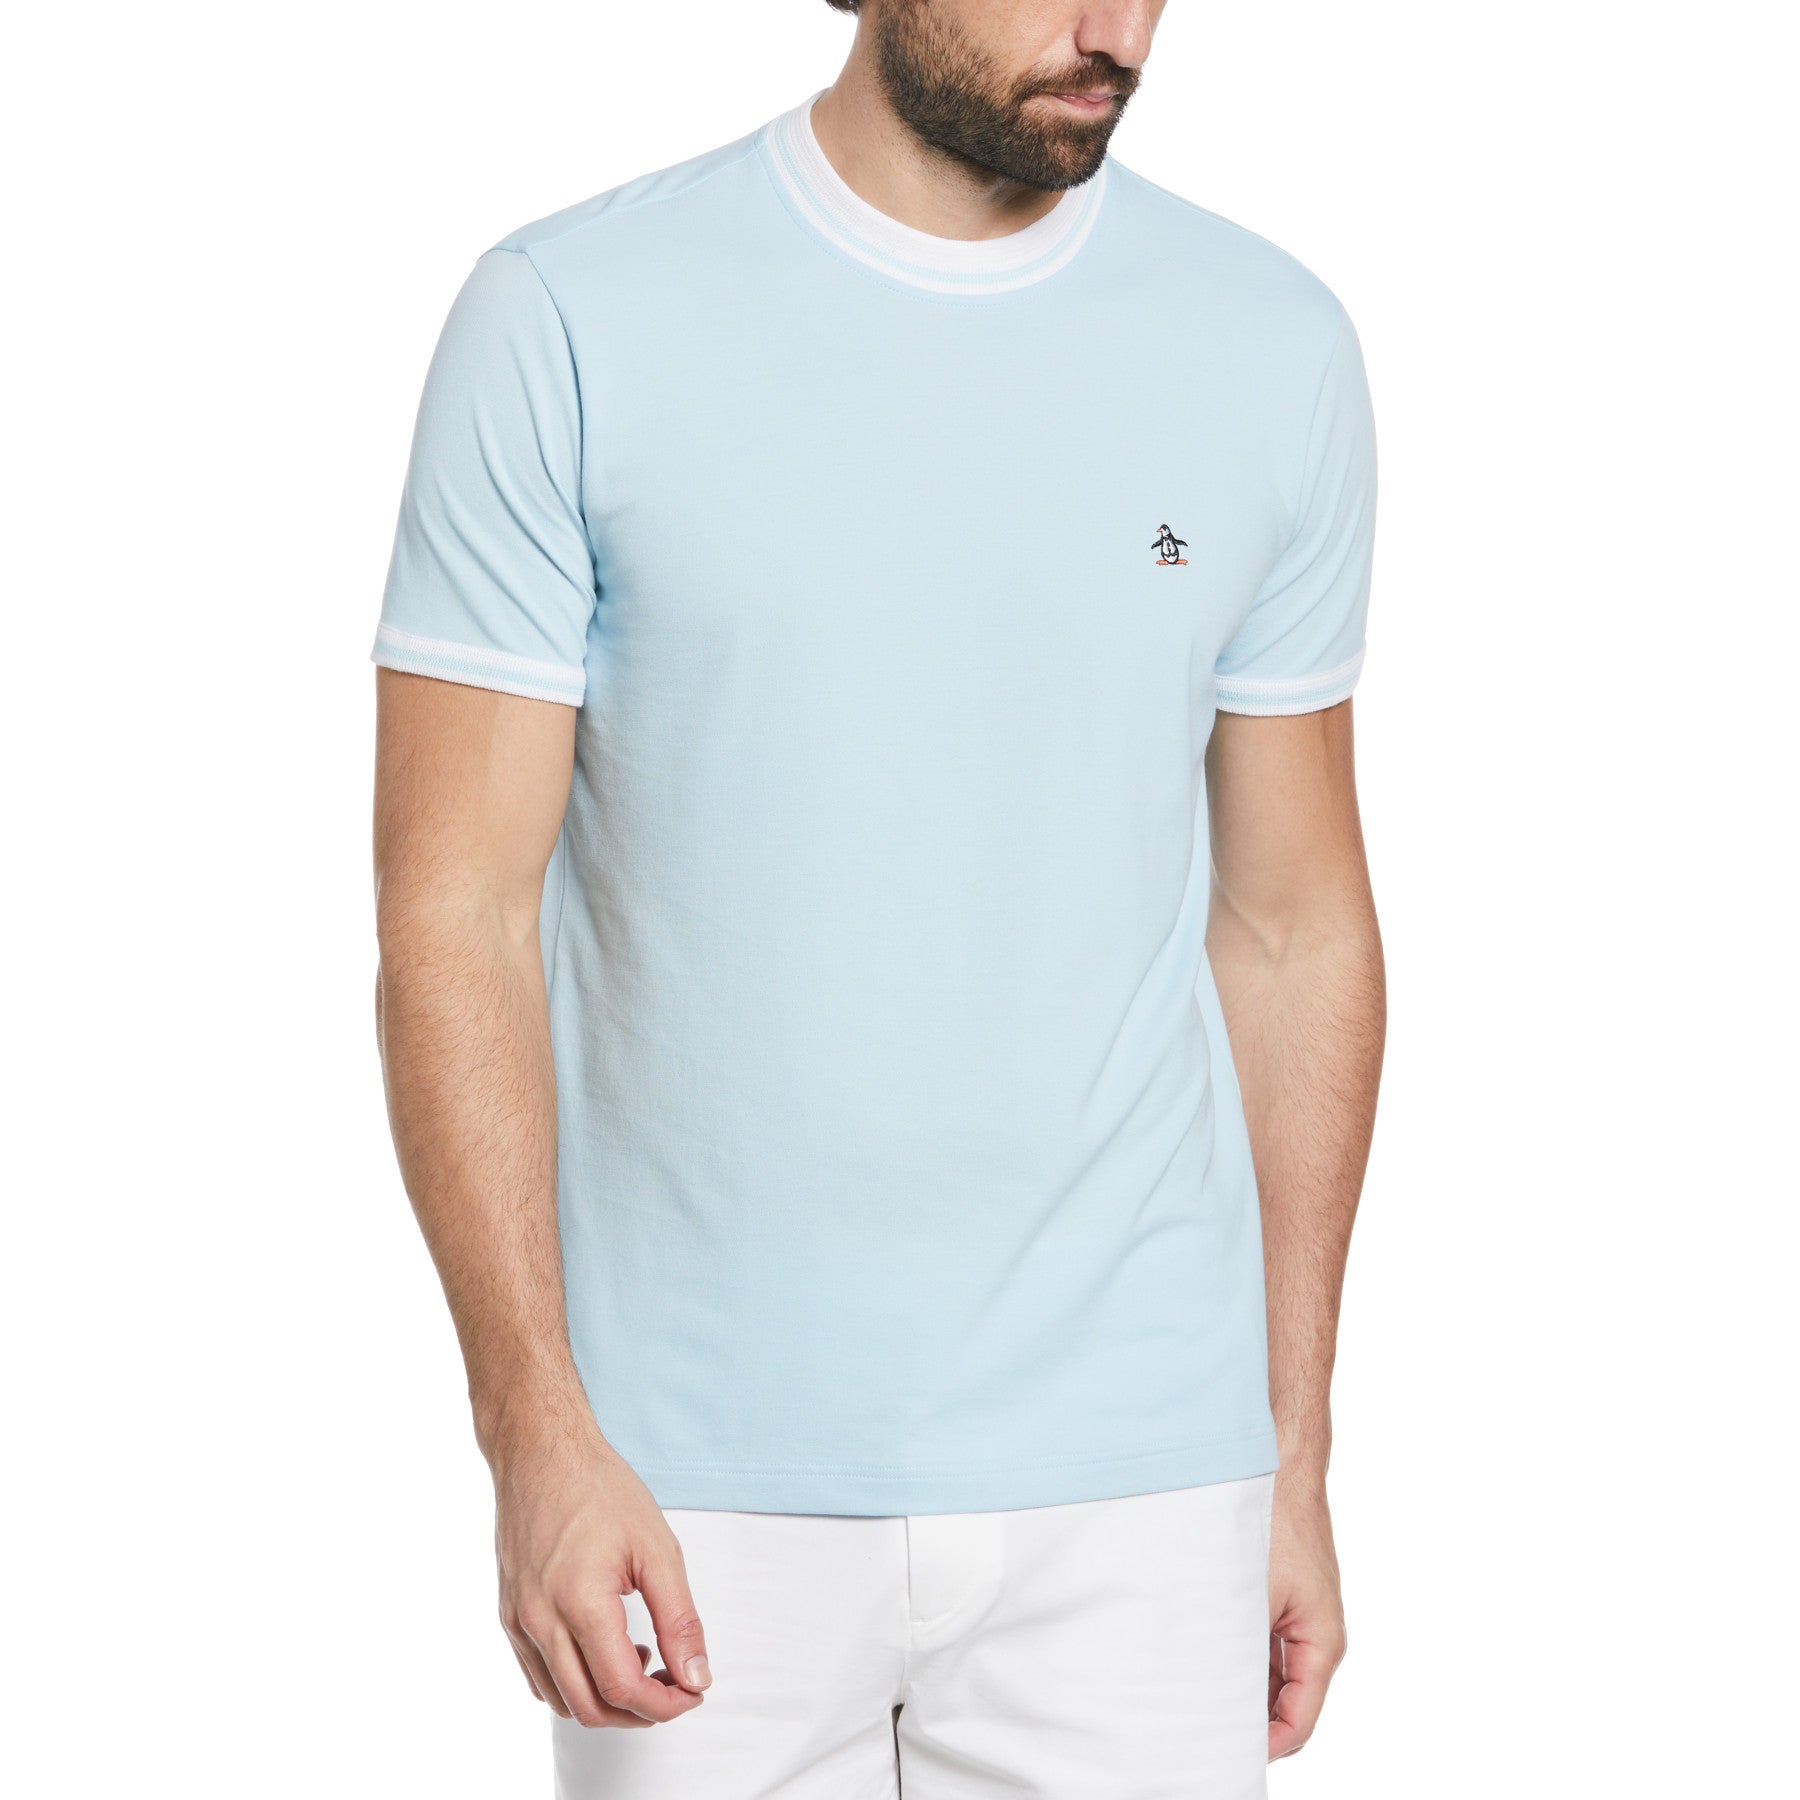 View Organic Cotton Short Sleeve Pique TShirt In Cool Blue information